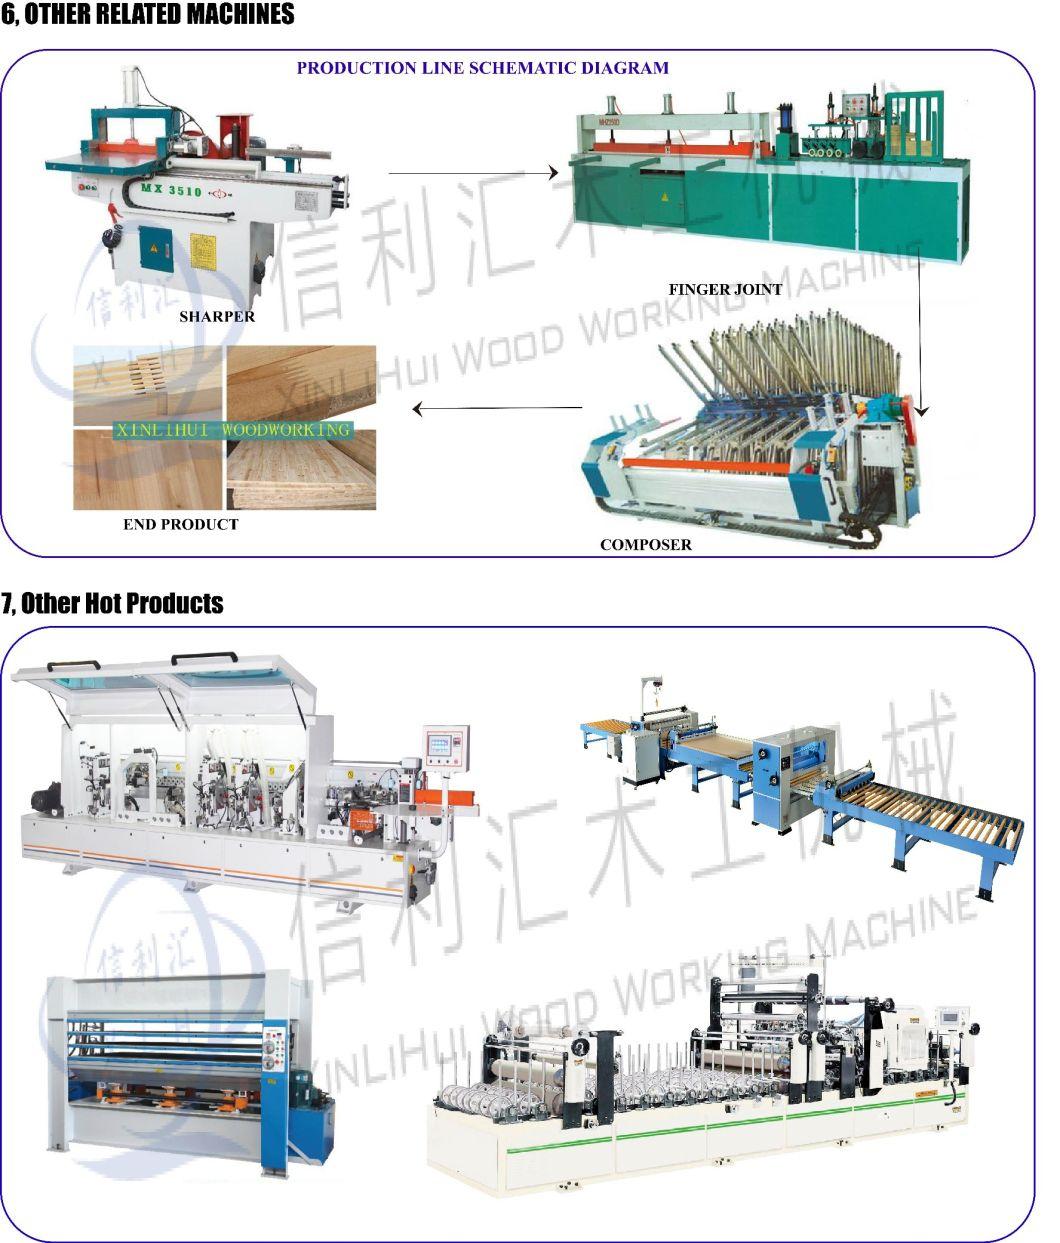 Multipurpose Saw Mill Industry, Mutlipurpose Saw Mill Machine, Different Size Timber Maker Saw Mill Machine, Saw Mill Machine